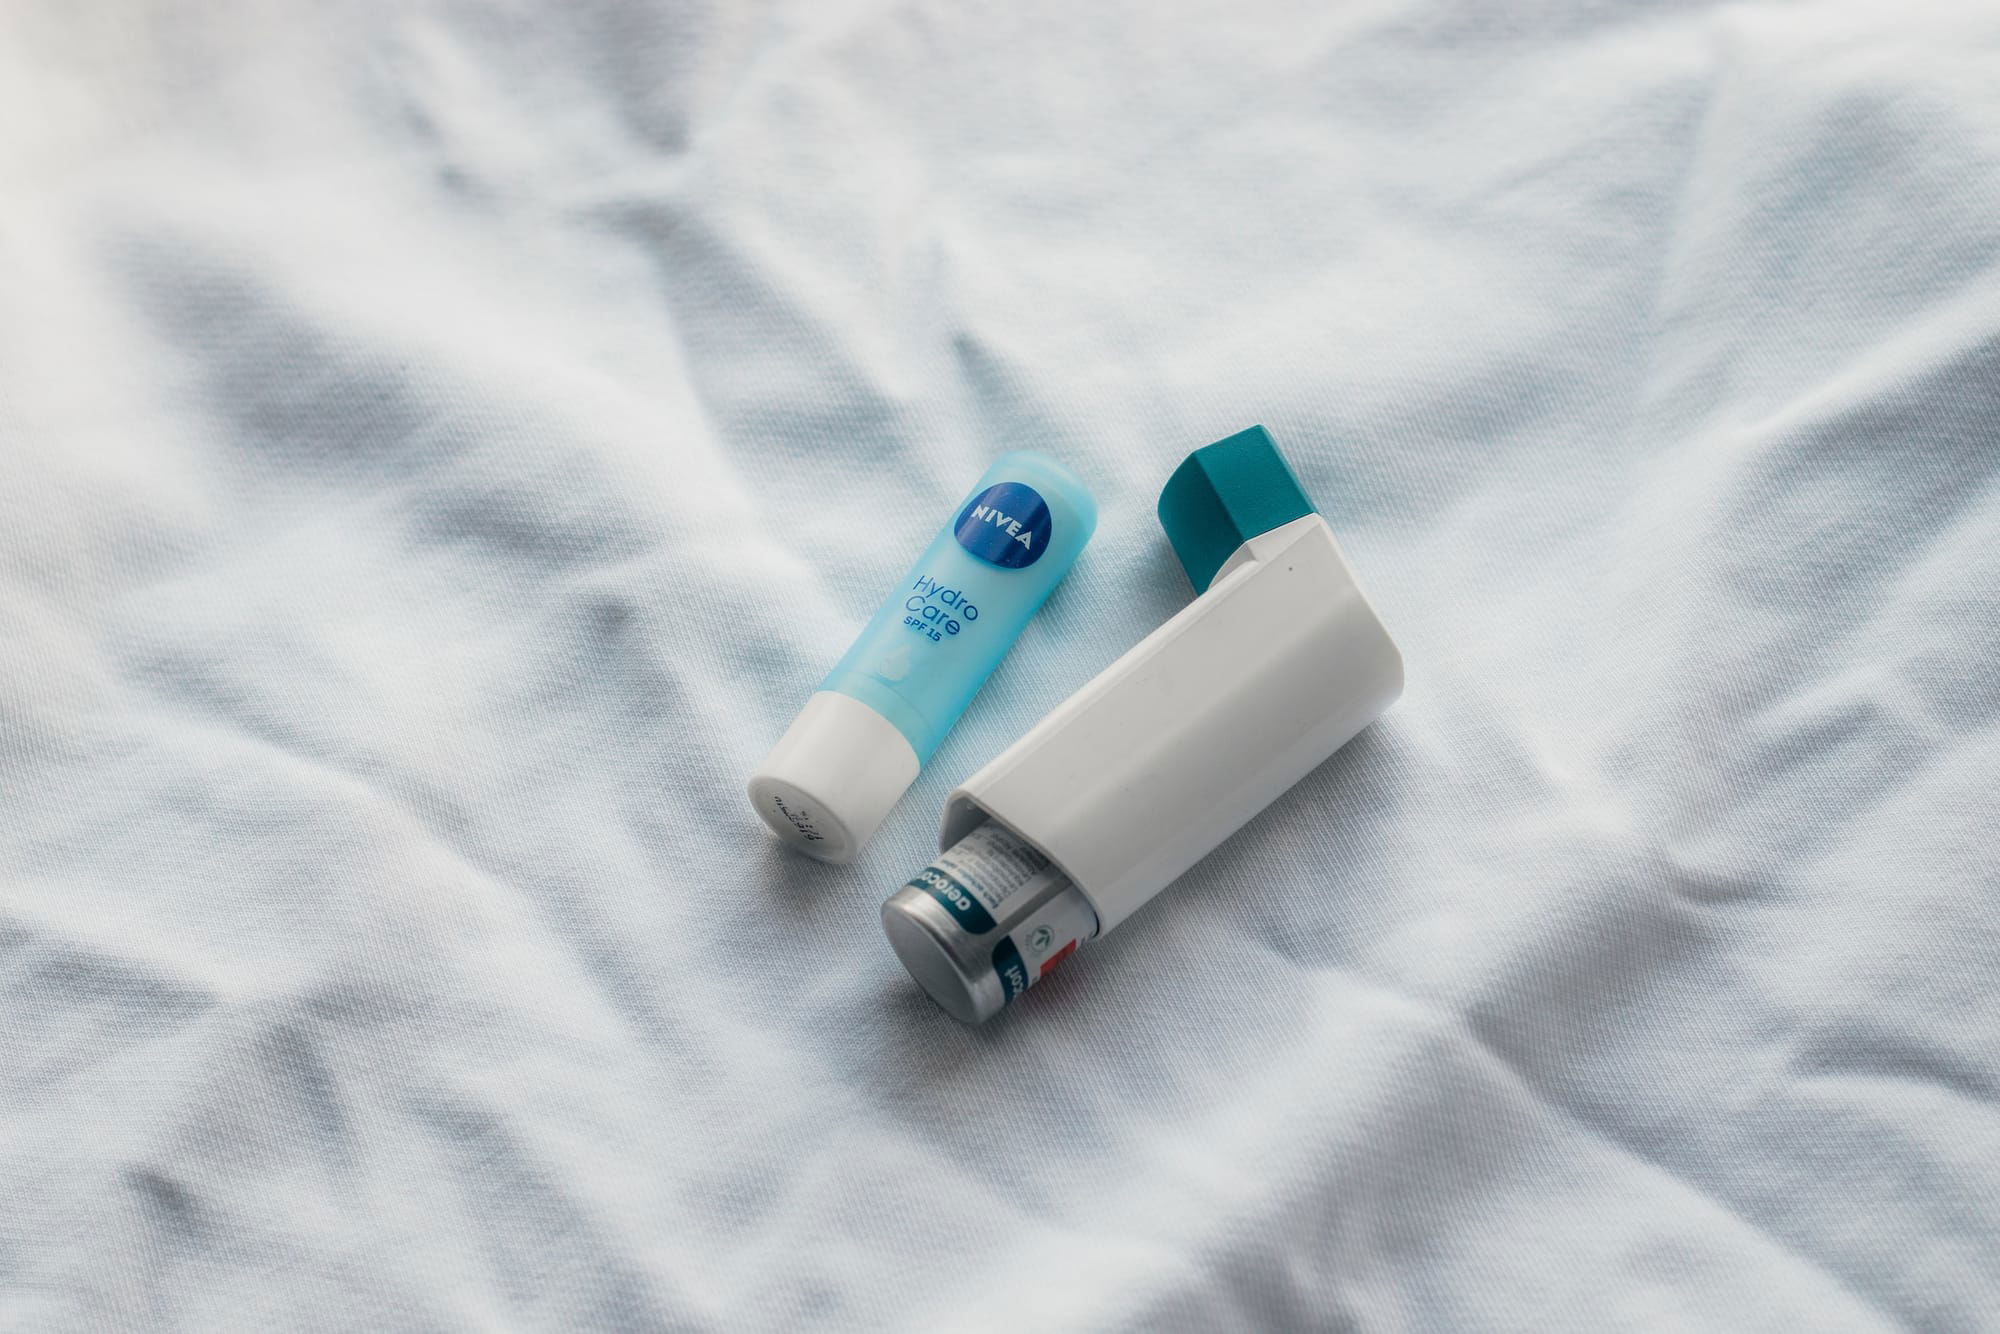 A new FDA approved drug combination for adults with asthma: albuterol and budesonide